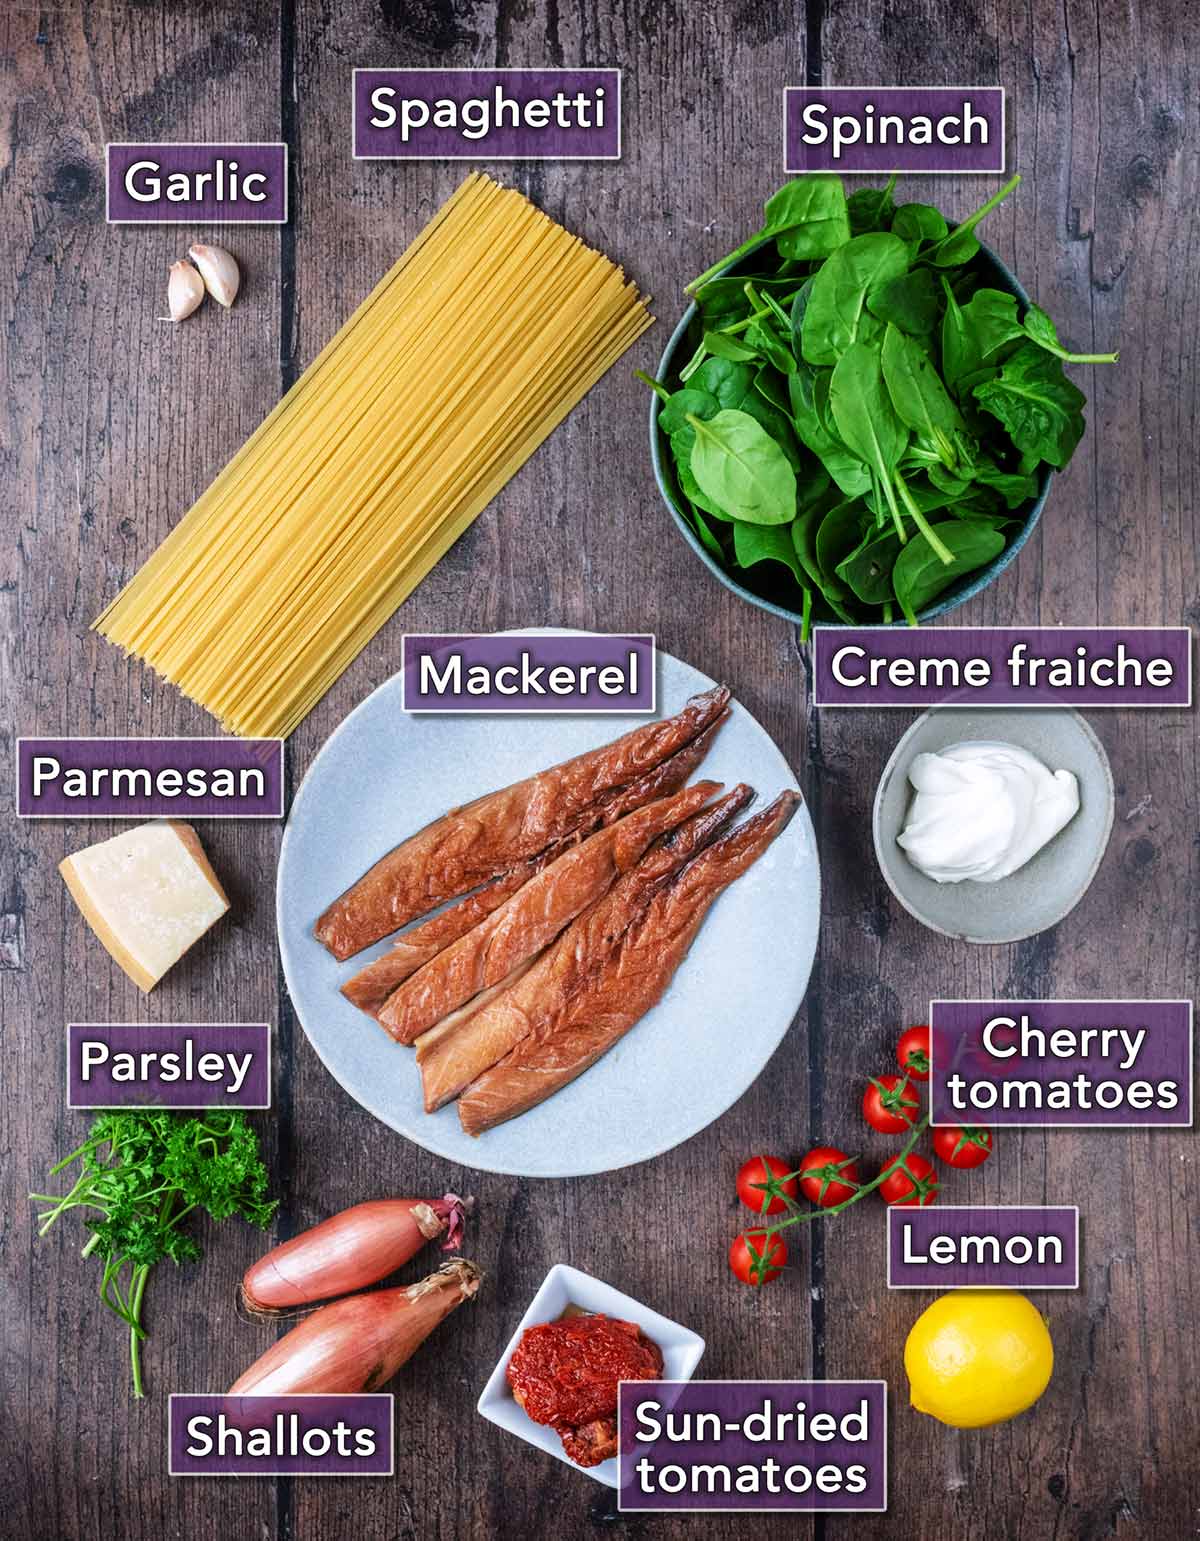 All the ingredients needed to make this recipe, each with a text overlay label.